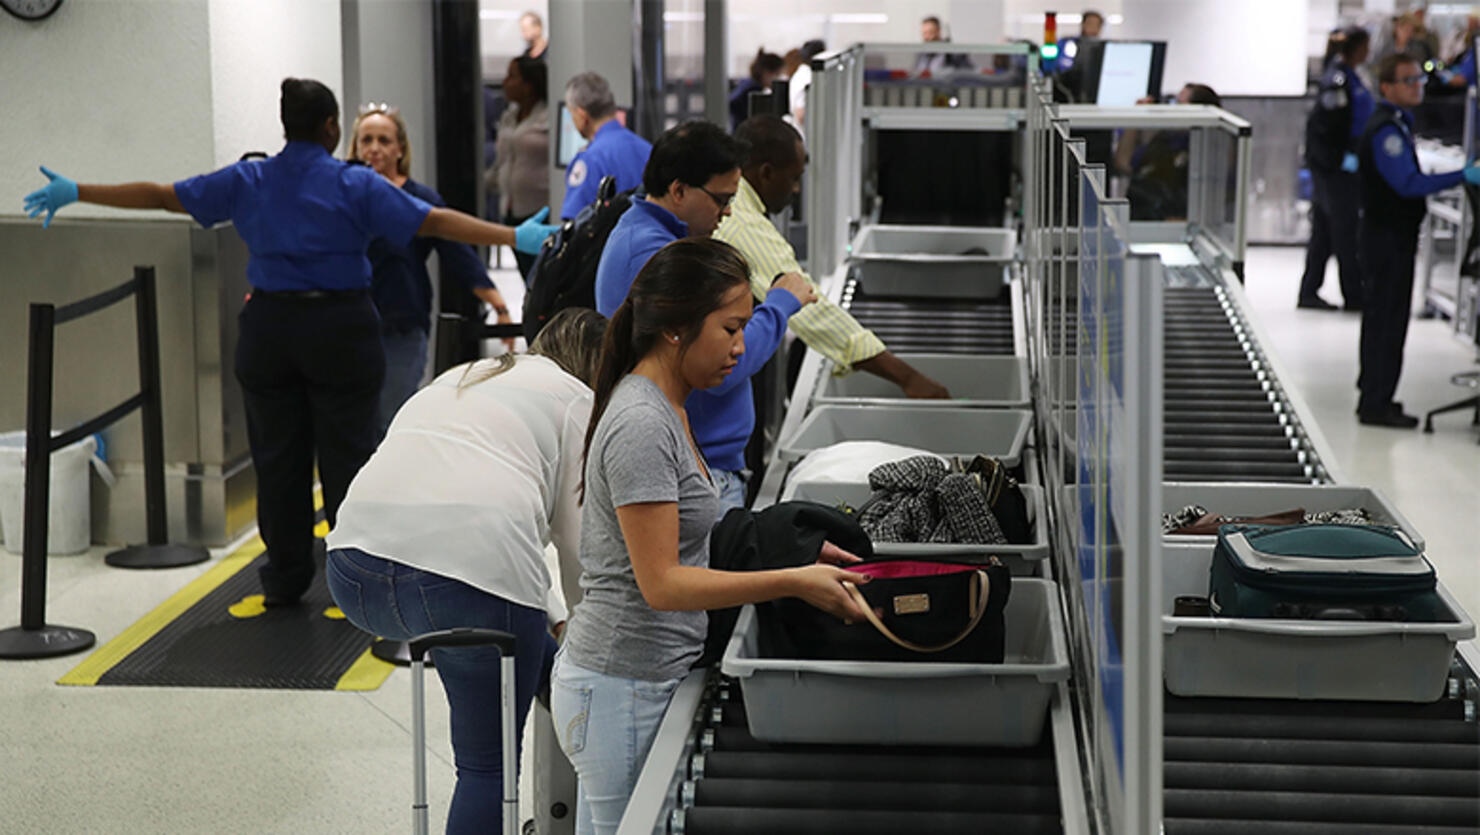 Travelers use the automated screening lanes funded by American Airlines and installed by the Transportation Security Administration at Miami International Airport